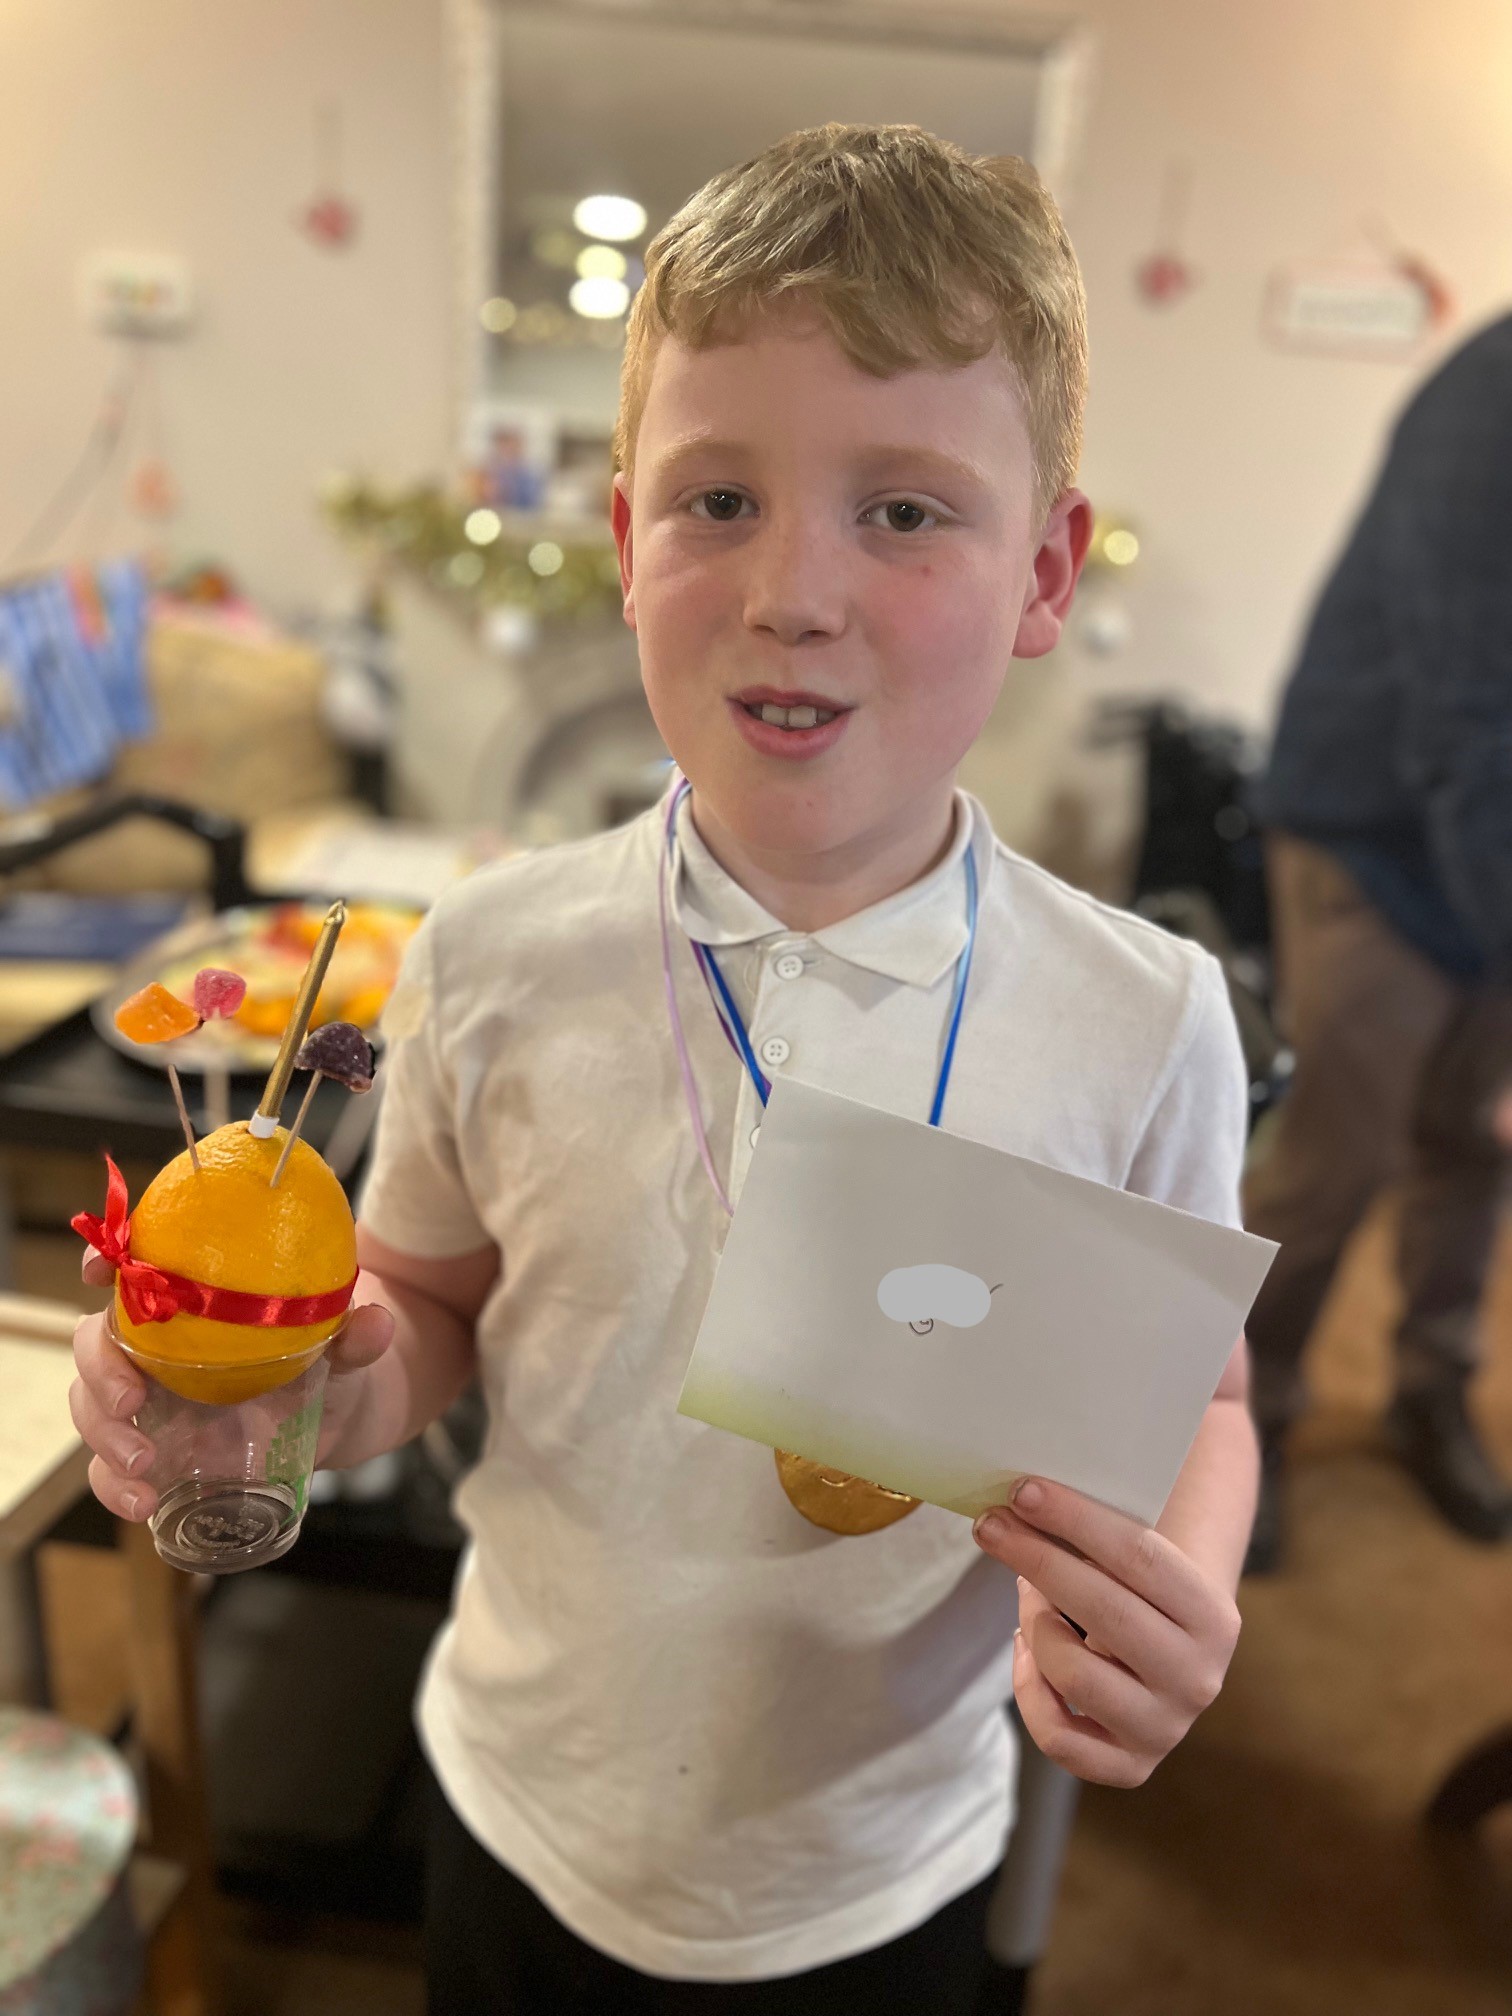 A boy faces camera holding an orange in a plastic beaker in one hand and an envelope in another